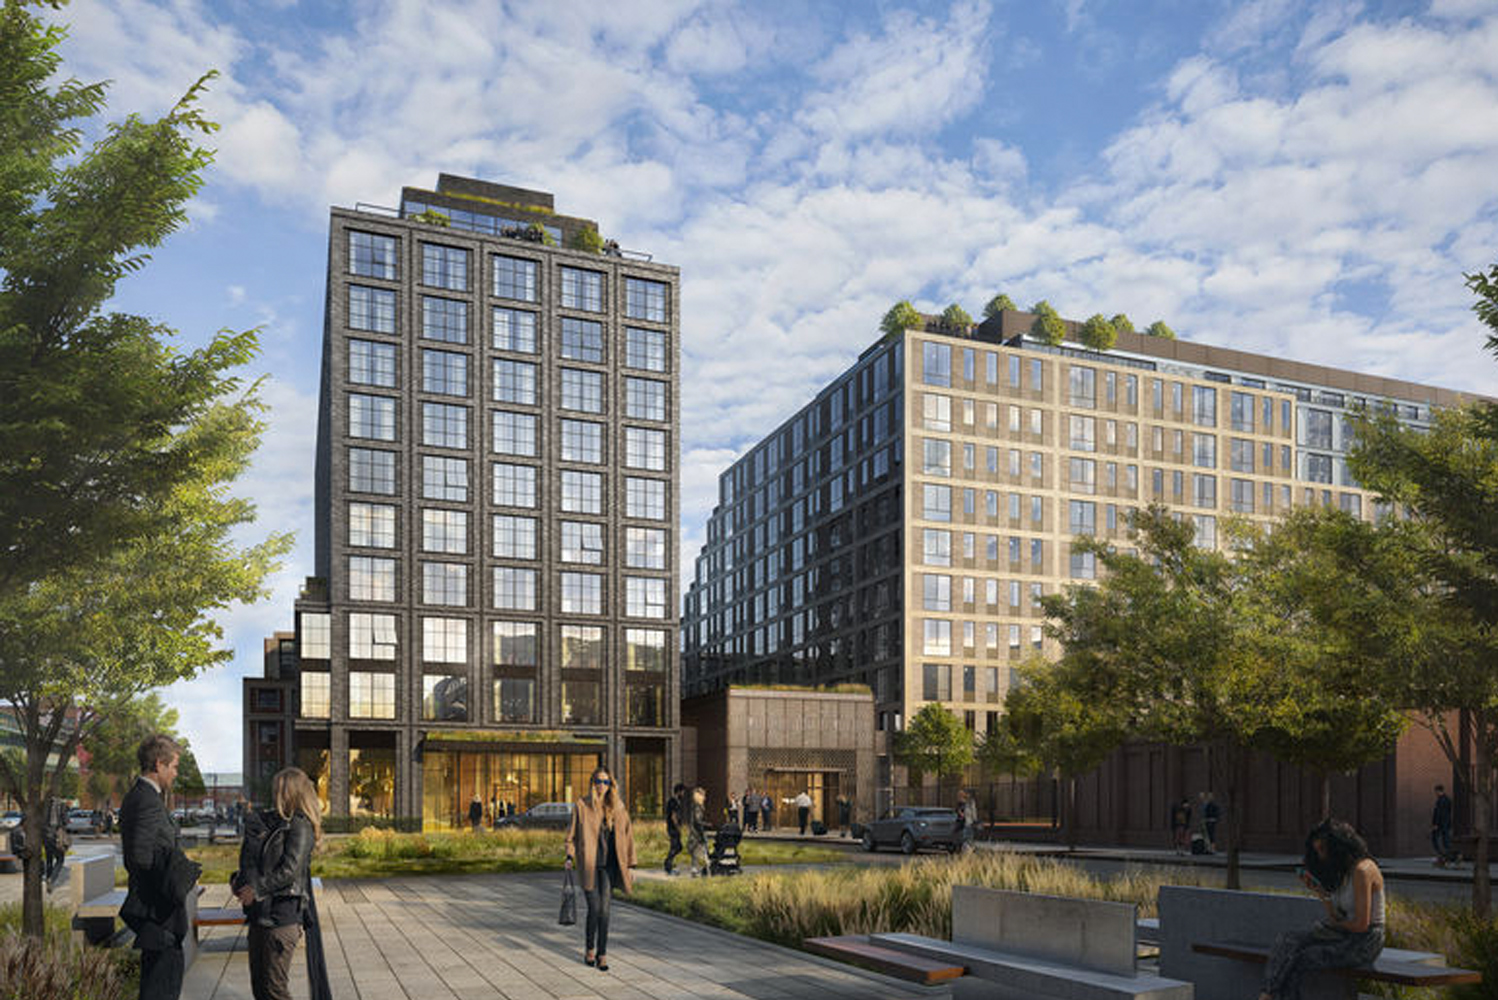 Thompson DC to open as first hotel in The Yards in 2020 designed by Studios Architecture Parts and Labor Design